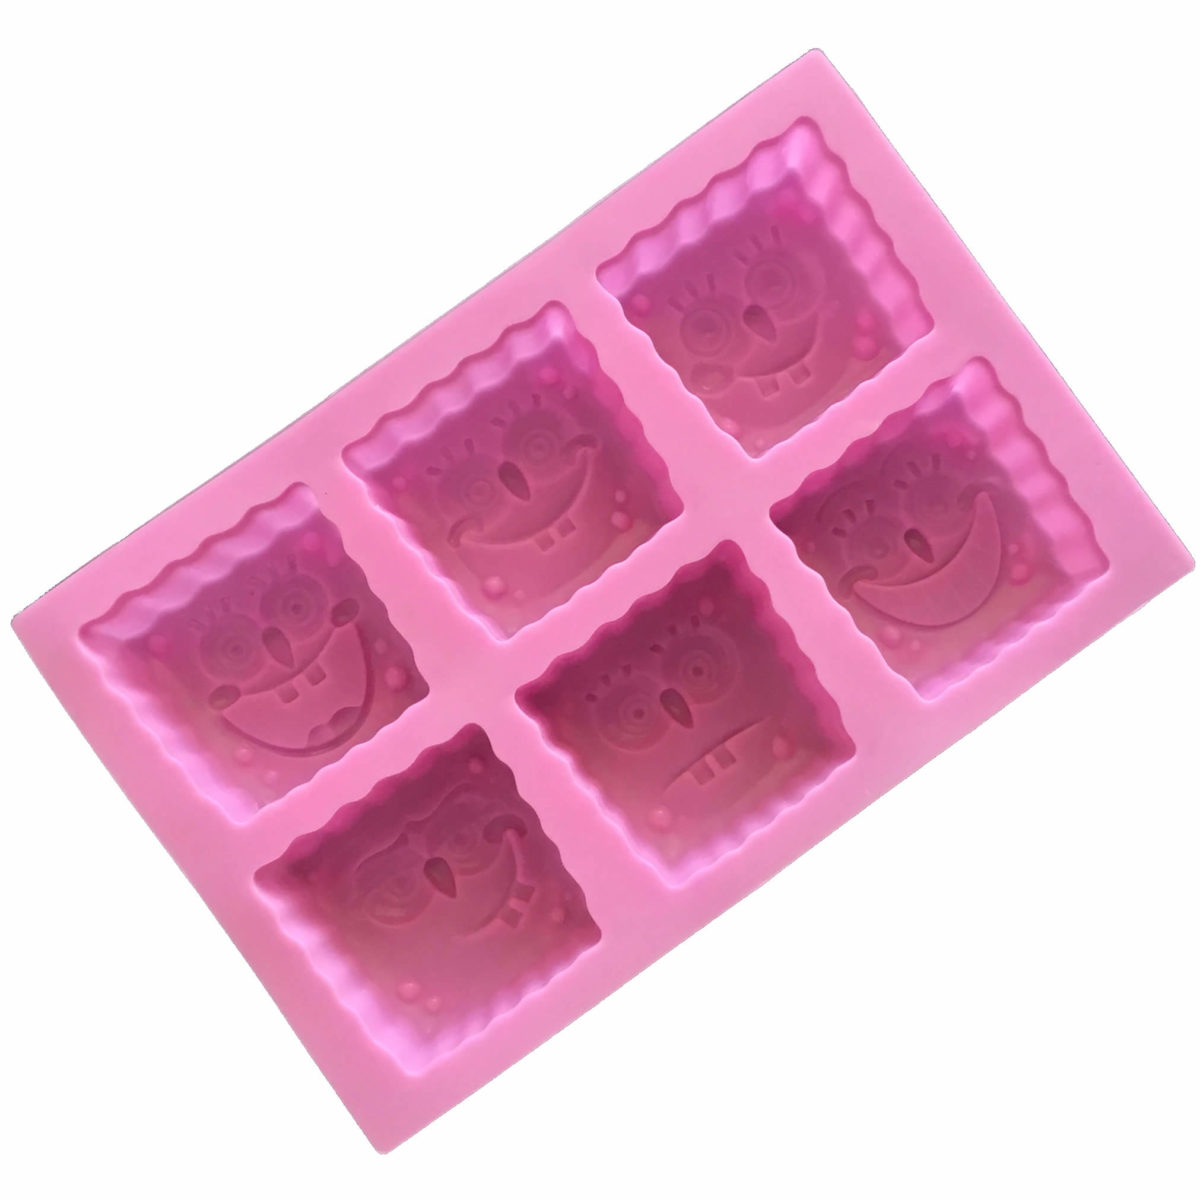 back of pink six cavity silicone mould with Sponge Bob head-shaped cavities each with an individual facial expression